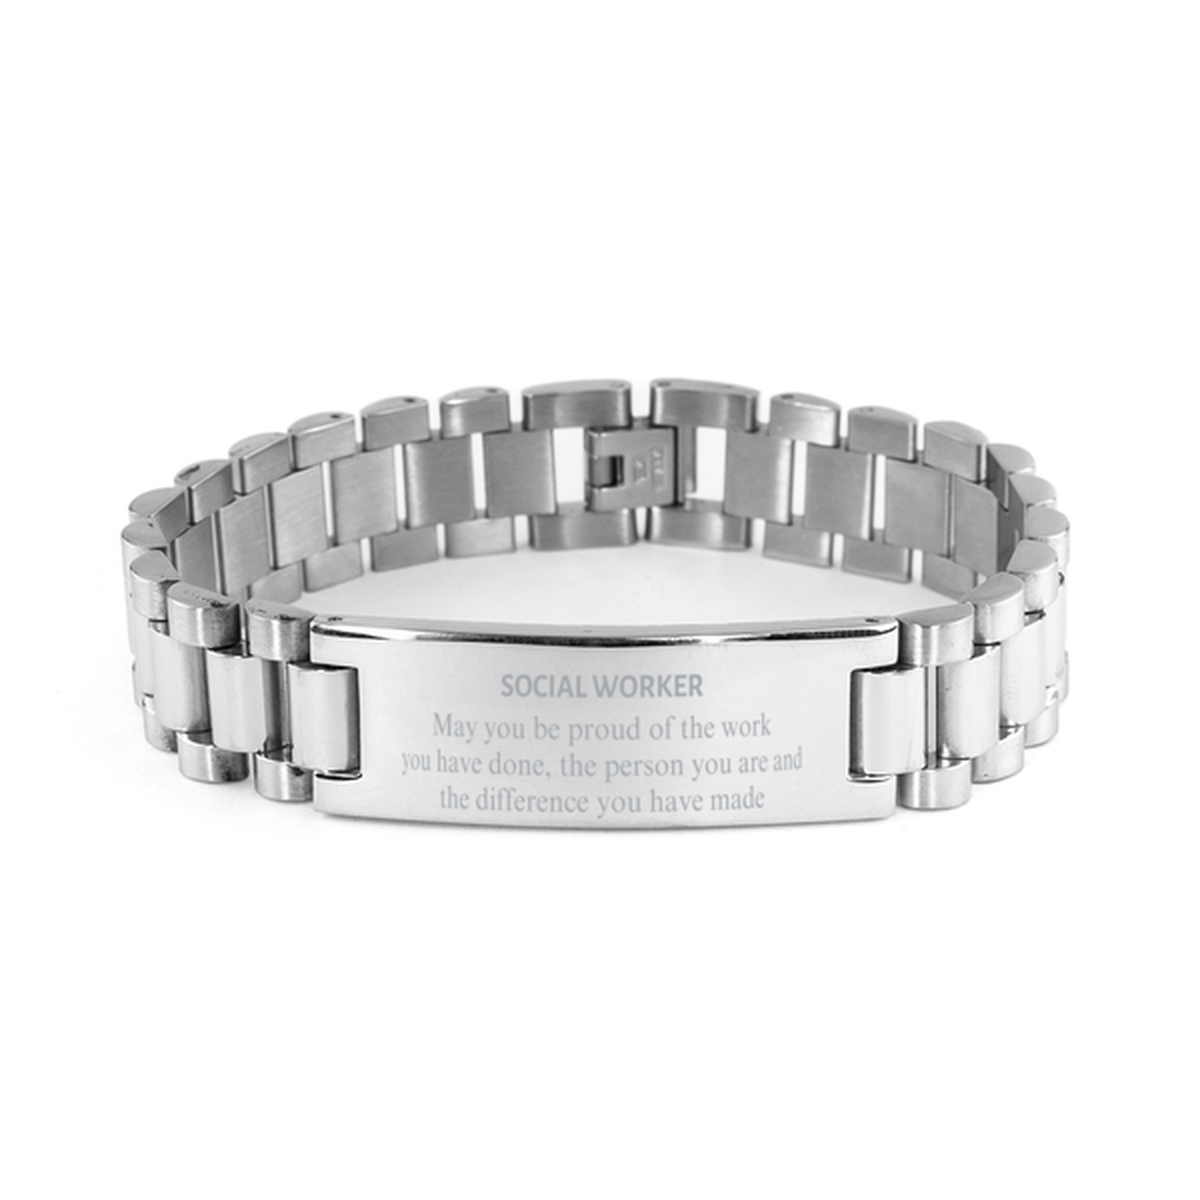 Social Worker May you be proud of the work you have done, Retirement Social Worker Ladder Stainless Steel Bracelet for Colleague Appreciation Gifts Amazing for Social Worker